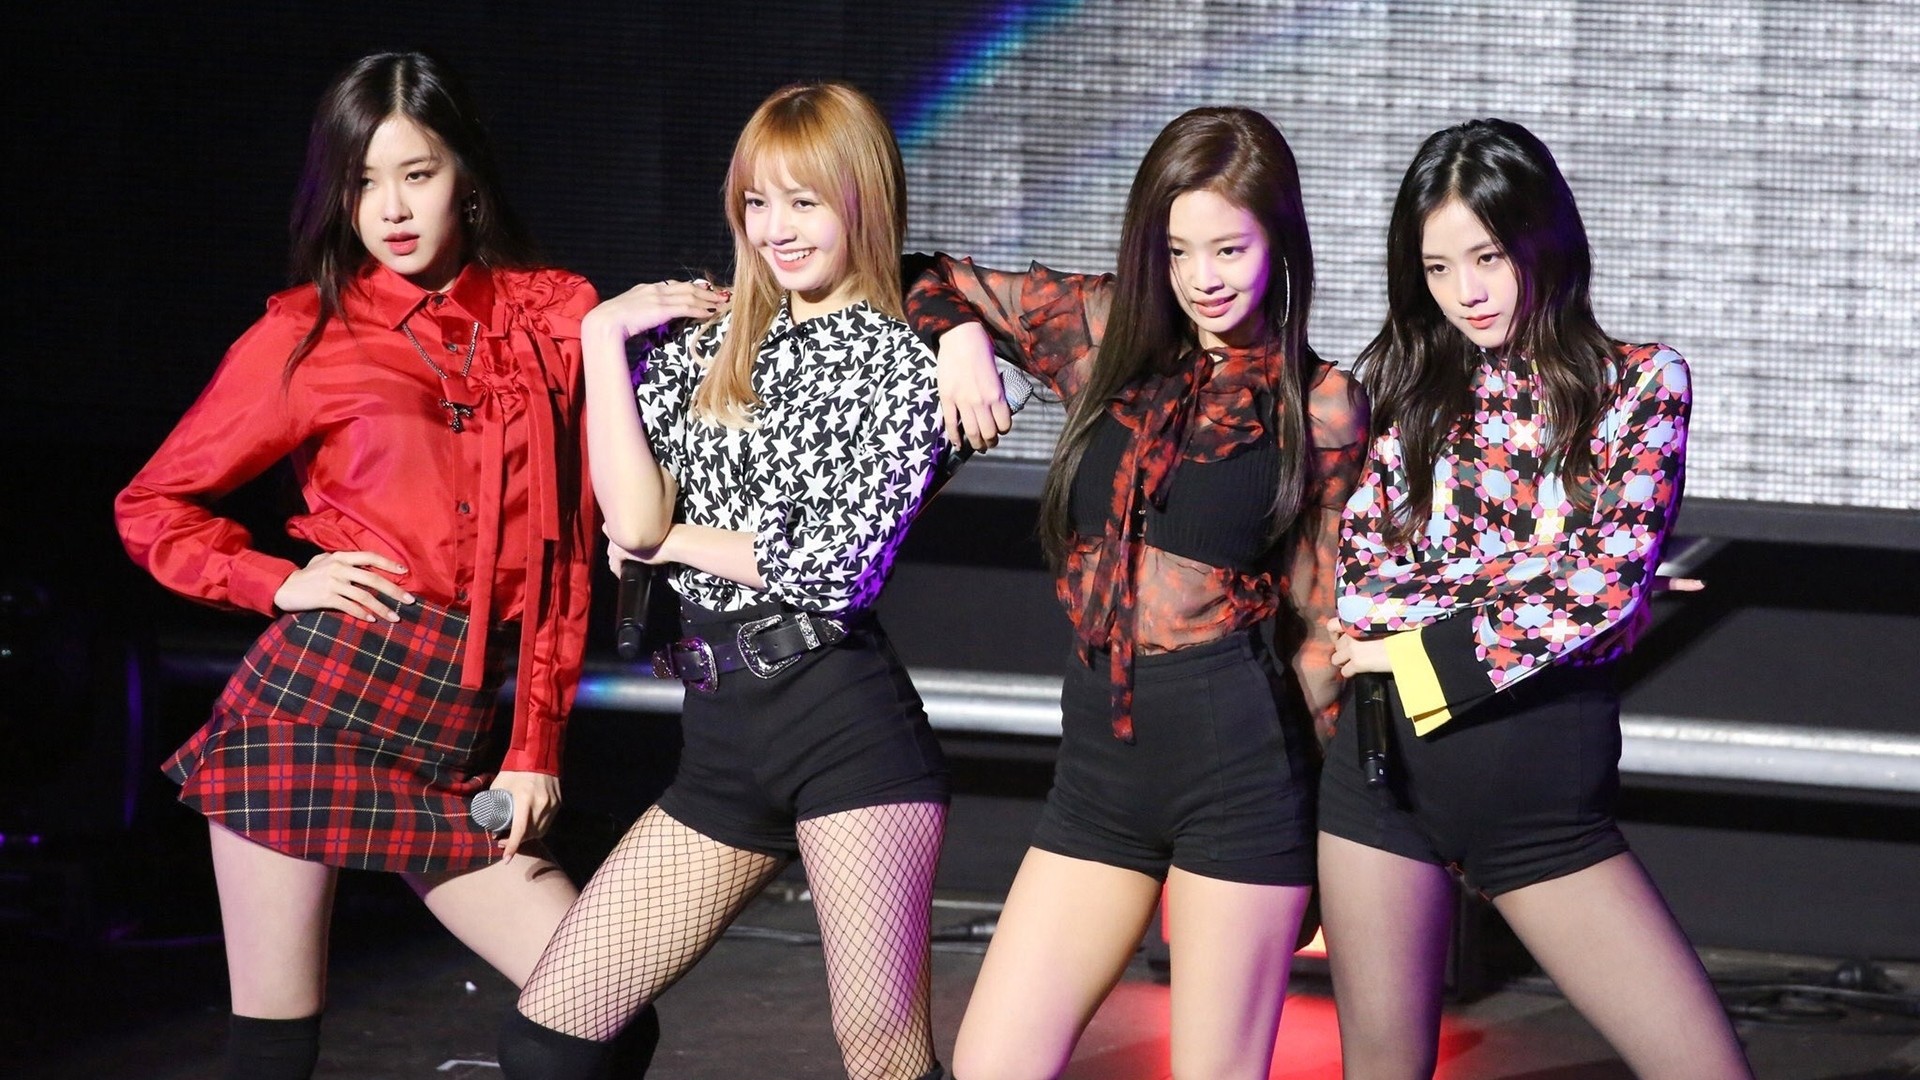 Blackpink Desktop Wallpaper with high-resolution 1920x1080 pixel. You can use this wallpaper for your Windows and Mac OS computers as well as your Android and iPhone smartphones